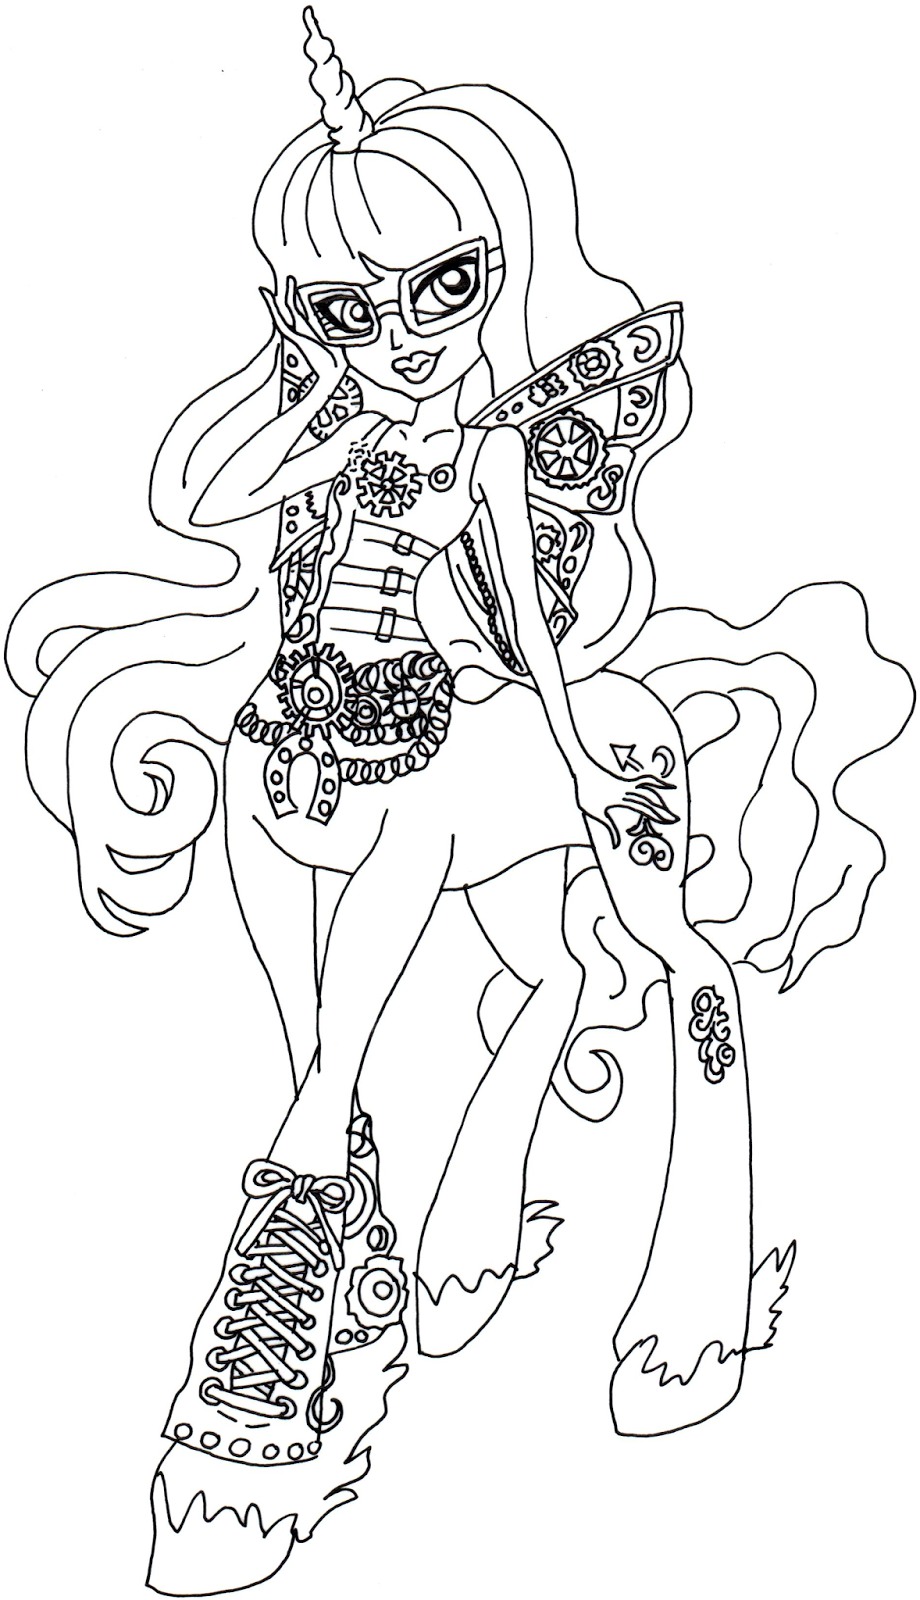 Free Printable Monster High Coloring Pages Penepole Steamtail Monster